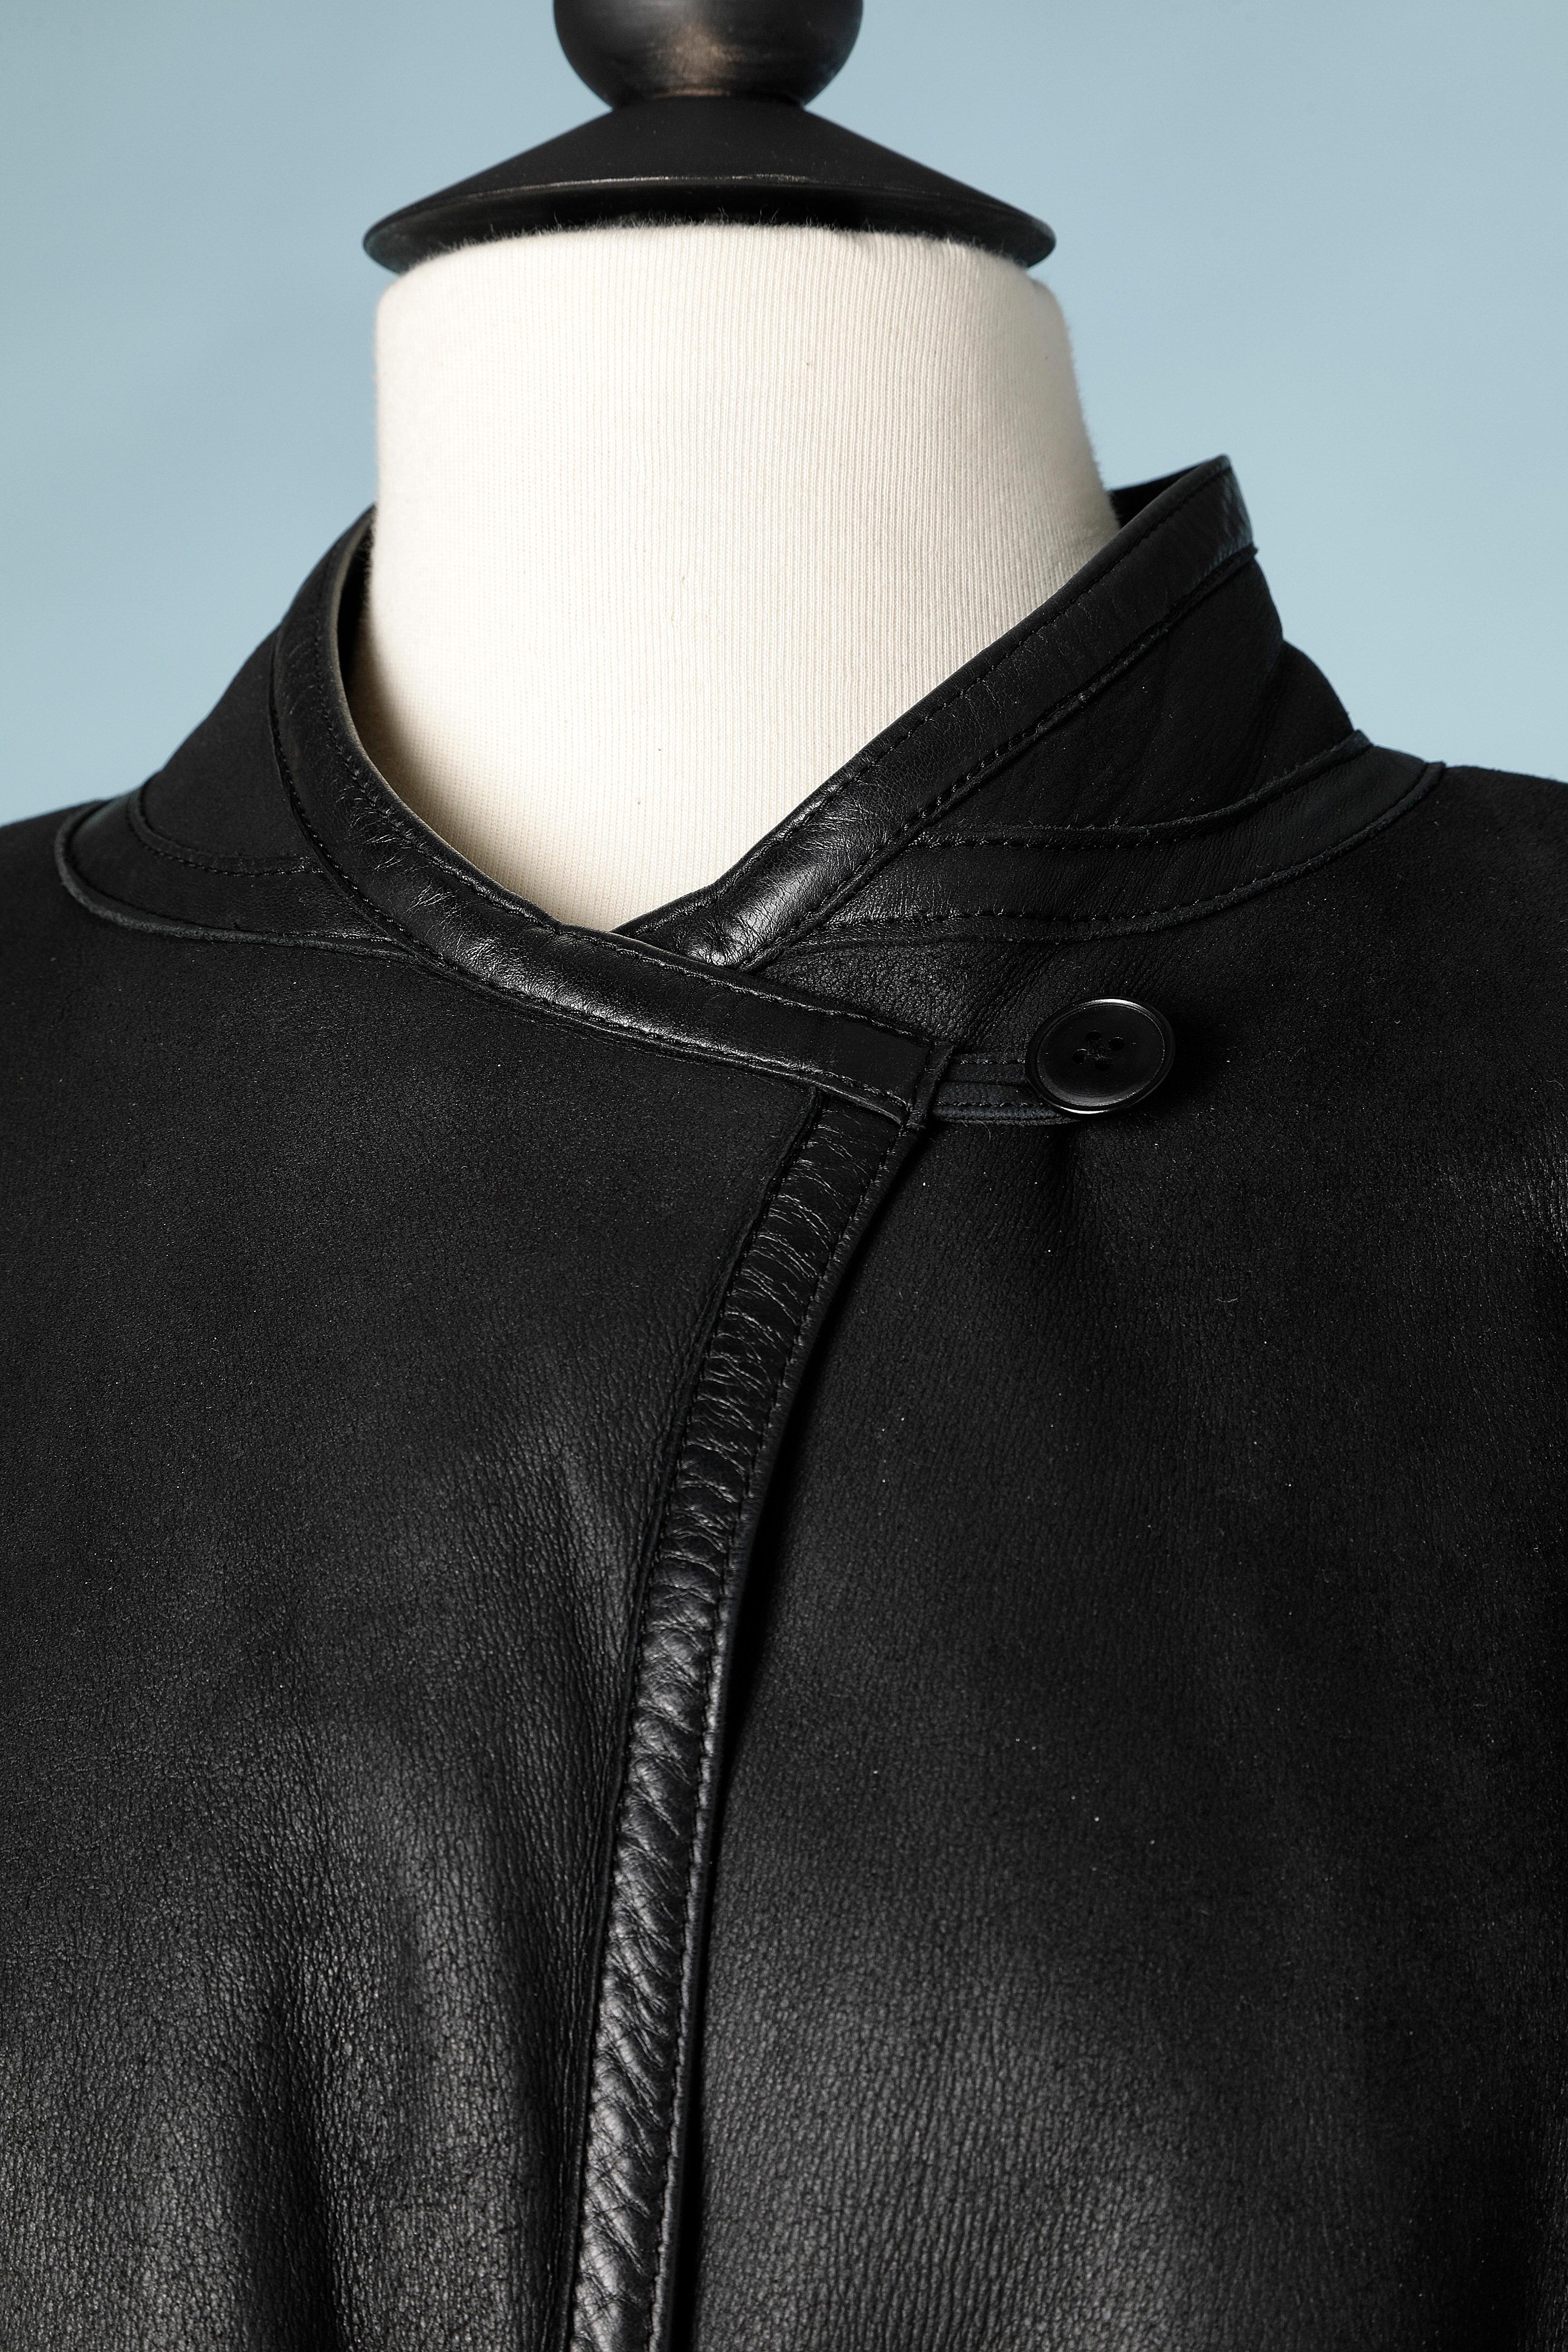 Black shearling coat with zip and zipped pockets.
SIZE XL (46 It) 